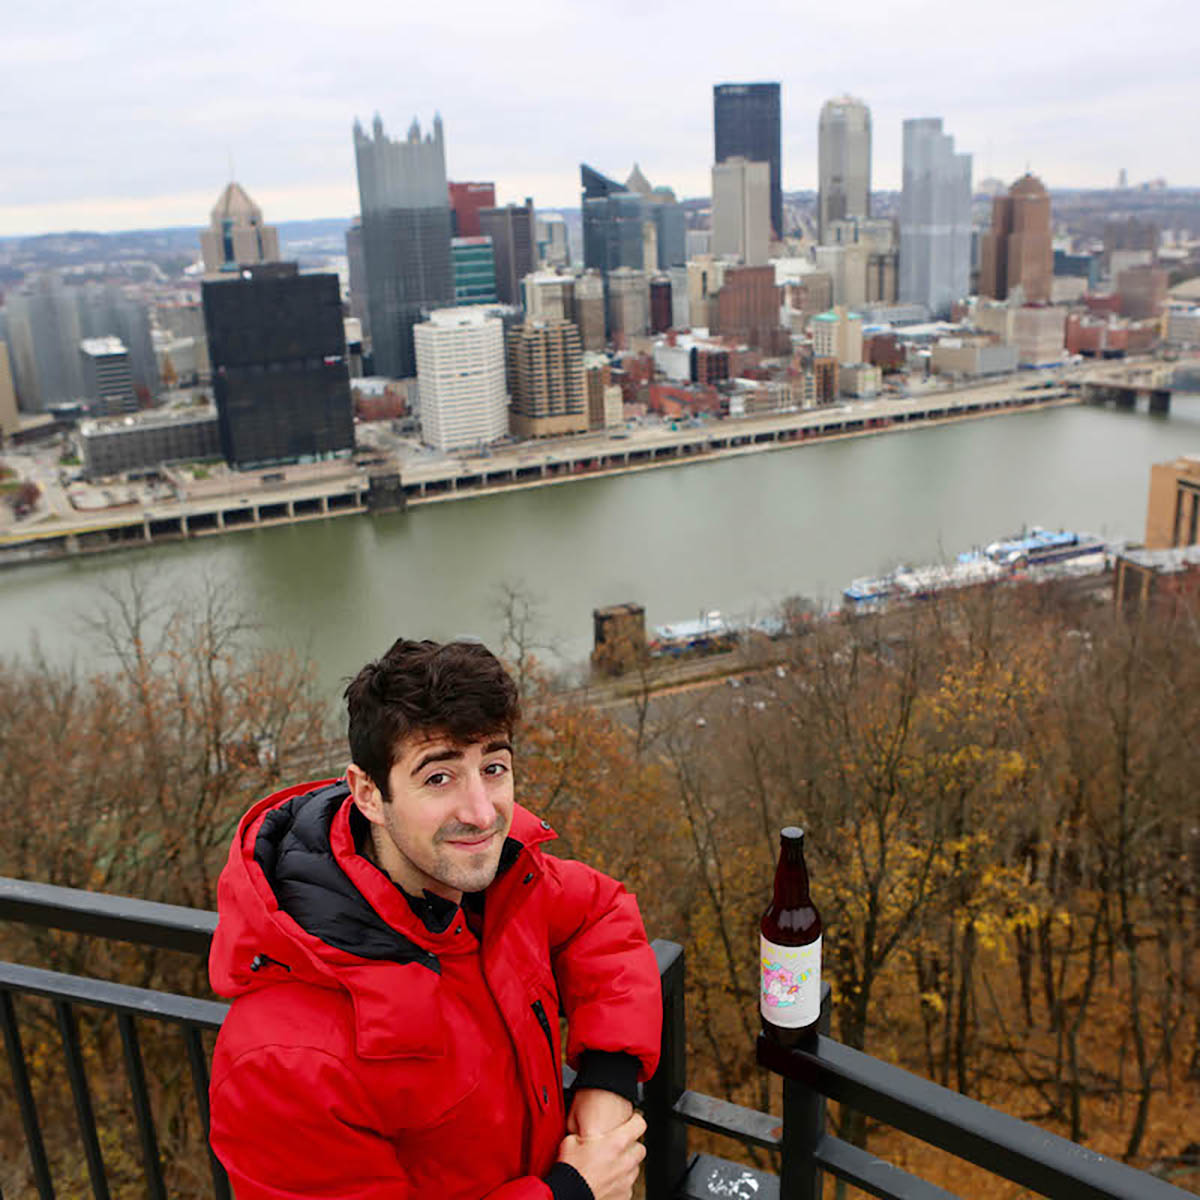 Photo of a young man in a red jacket posing with a beer bottle in front of the Pittsburgh skyline